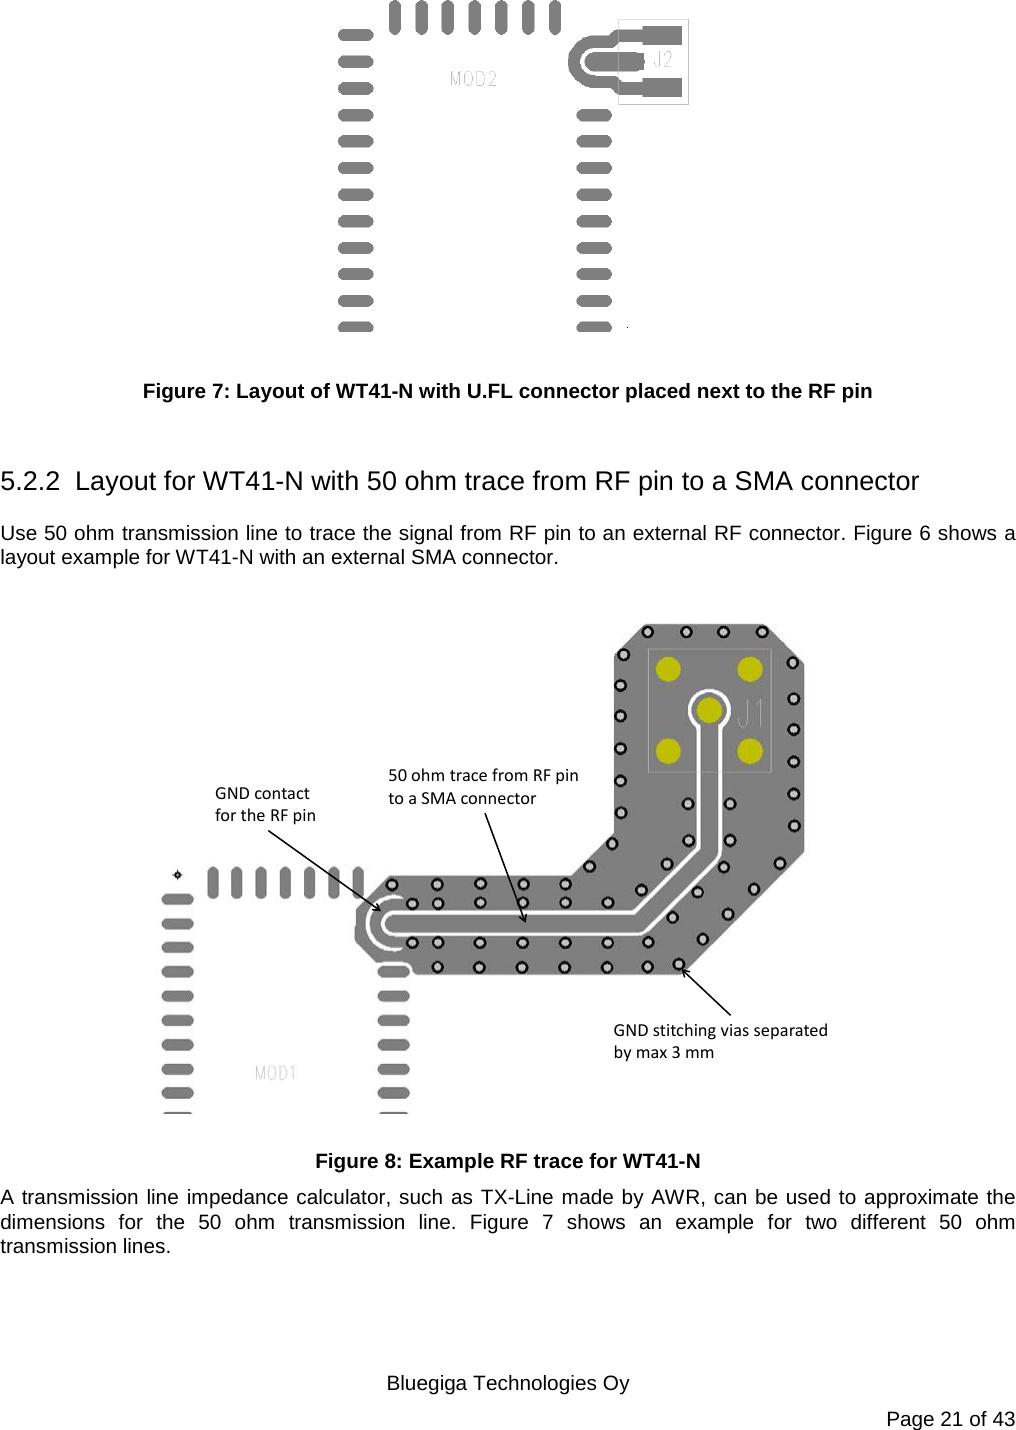   Bluegiga Technologies Oy Page 21 of 43   Figure 7: Layout of WT41-N with U.FL connector placed next to the RF pin  5.2.2 Layout for WT41-N with 50 ohm trace from RF pin to a SMA connector Use 50 ohm transmission line to trace the signal from RF pin to an external RF connector. Figure 6 shows a layout example for WT41-N with an external SMA connector.   GND stitching vias separated by max 3 mm50 ohm trace from RF pin to a SMA connectorGND contact for the RF pin Figure 8: Example RF trace for WT41-N A transmission line impedance calculator, such as TX-Line made by AWR, can be used to approximate the dimensions for the 50 ohm transmission line. Figure 7 shows an example for two different 50 ohm transmission lines. 